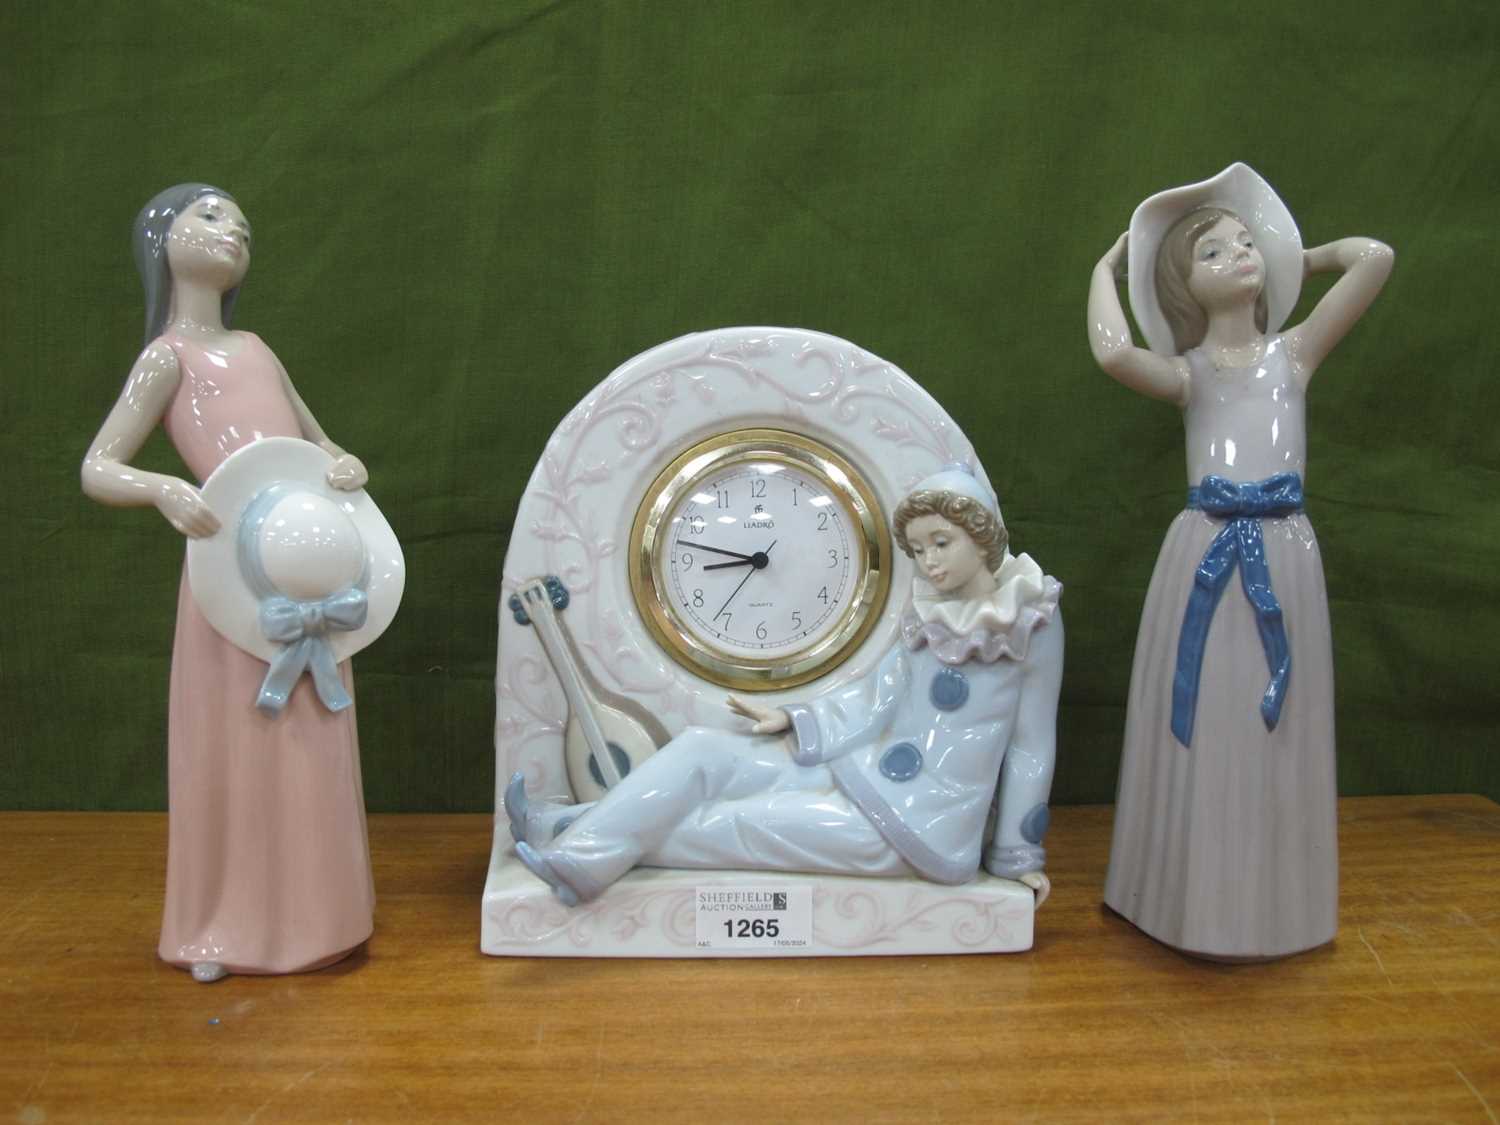 Lladro Porcelain Clock, with reclining clown and lute, 21cm high, together with two Lladro figures